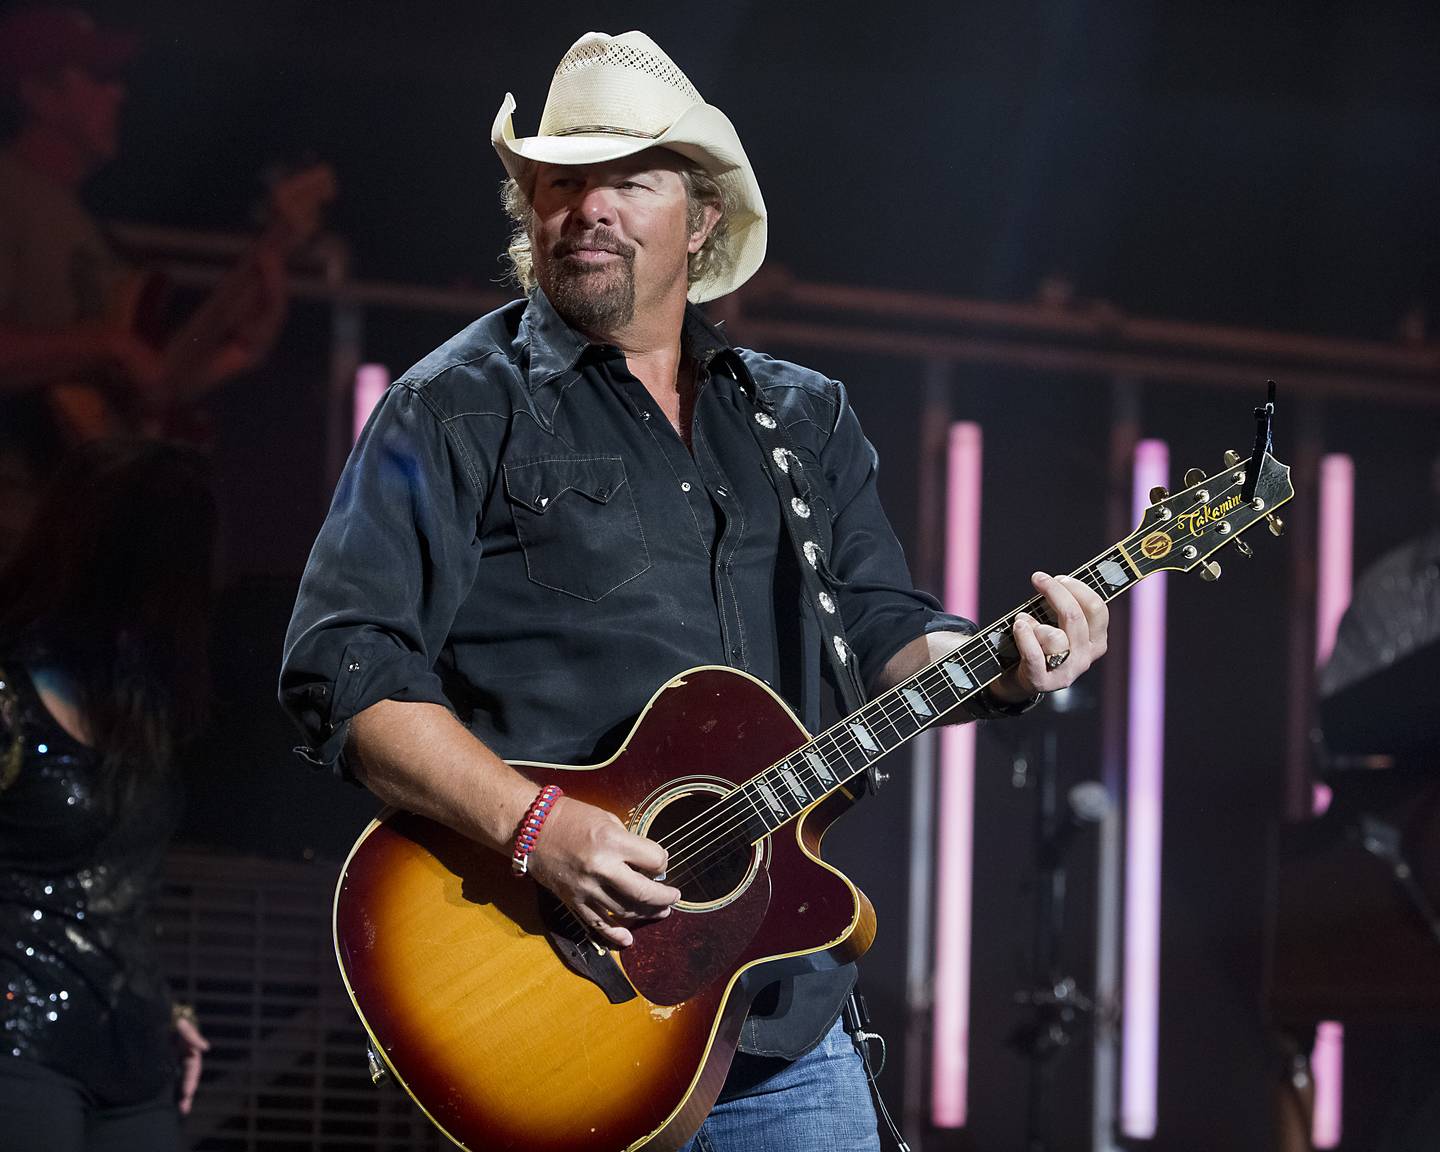 Toby Keith Plots That’s Country Bro! Tour | News | CMT